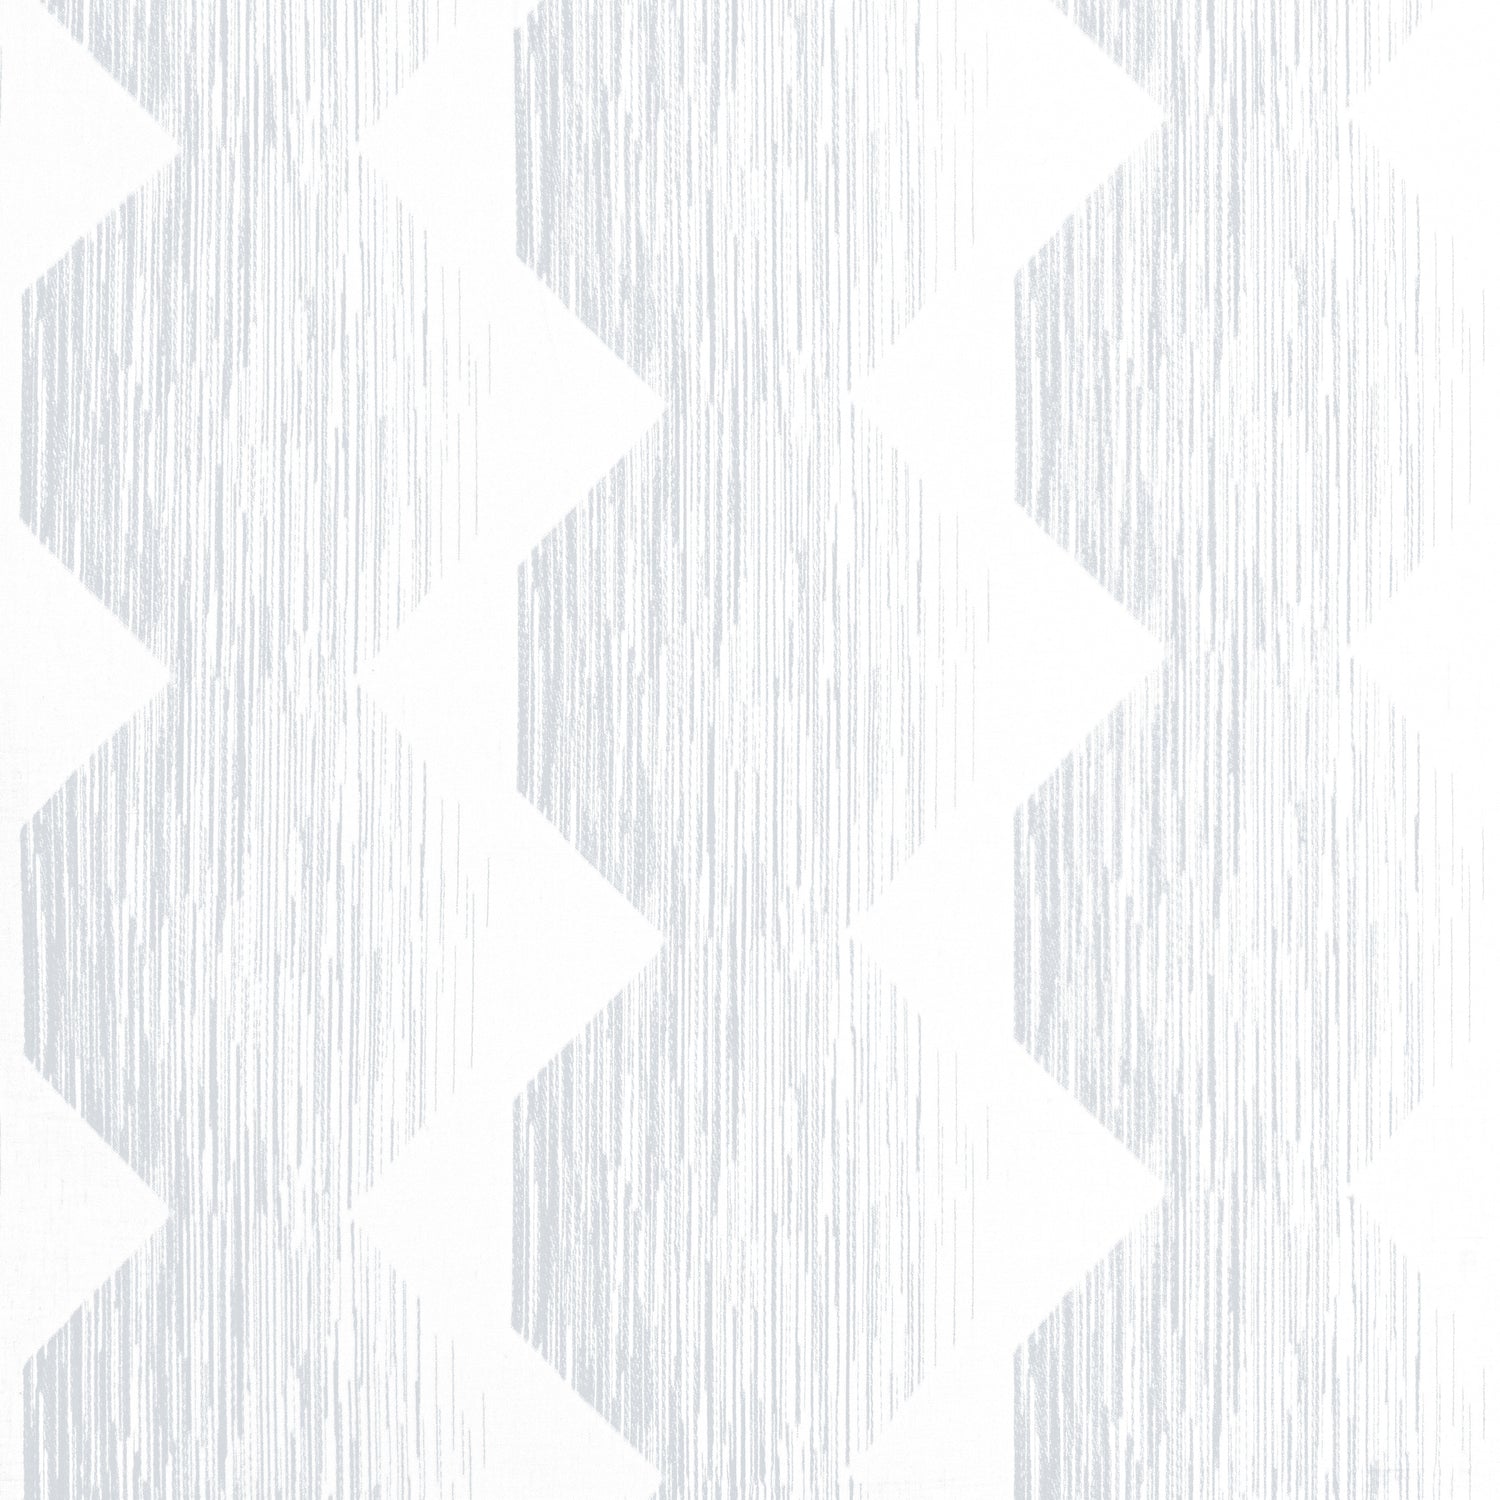 Enzo fabric in platinum color - pattern number FWW8273 - by Thibaut in the Aura collection